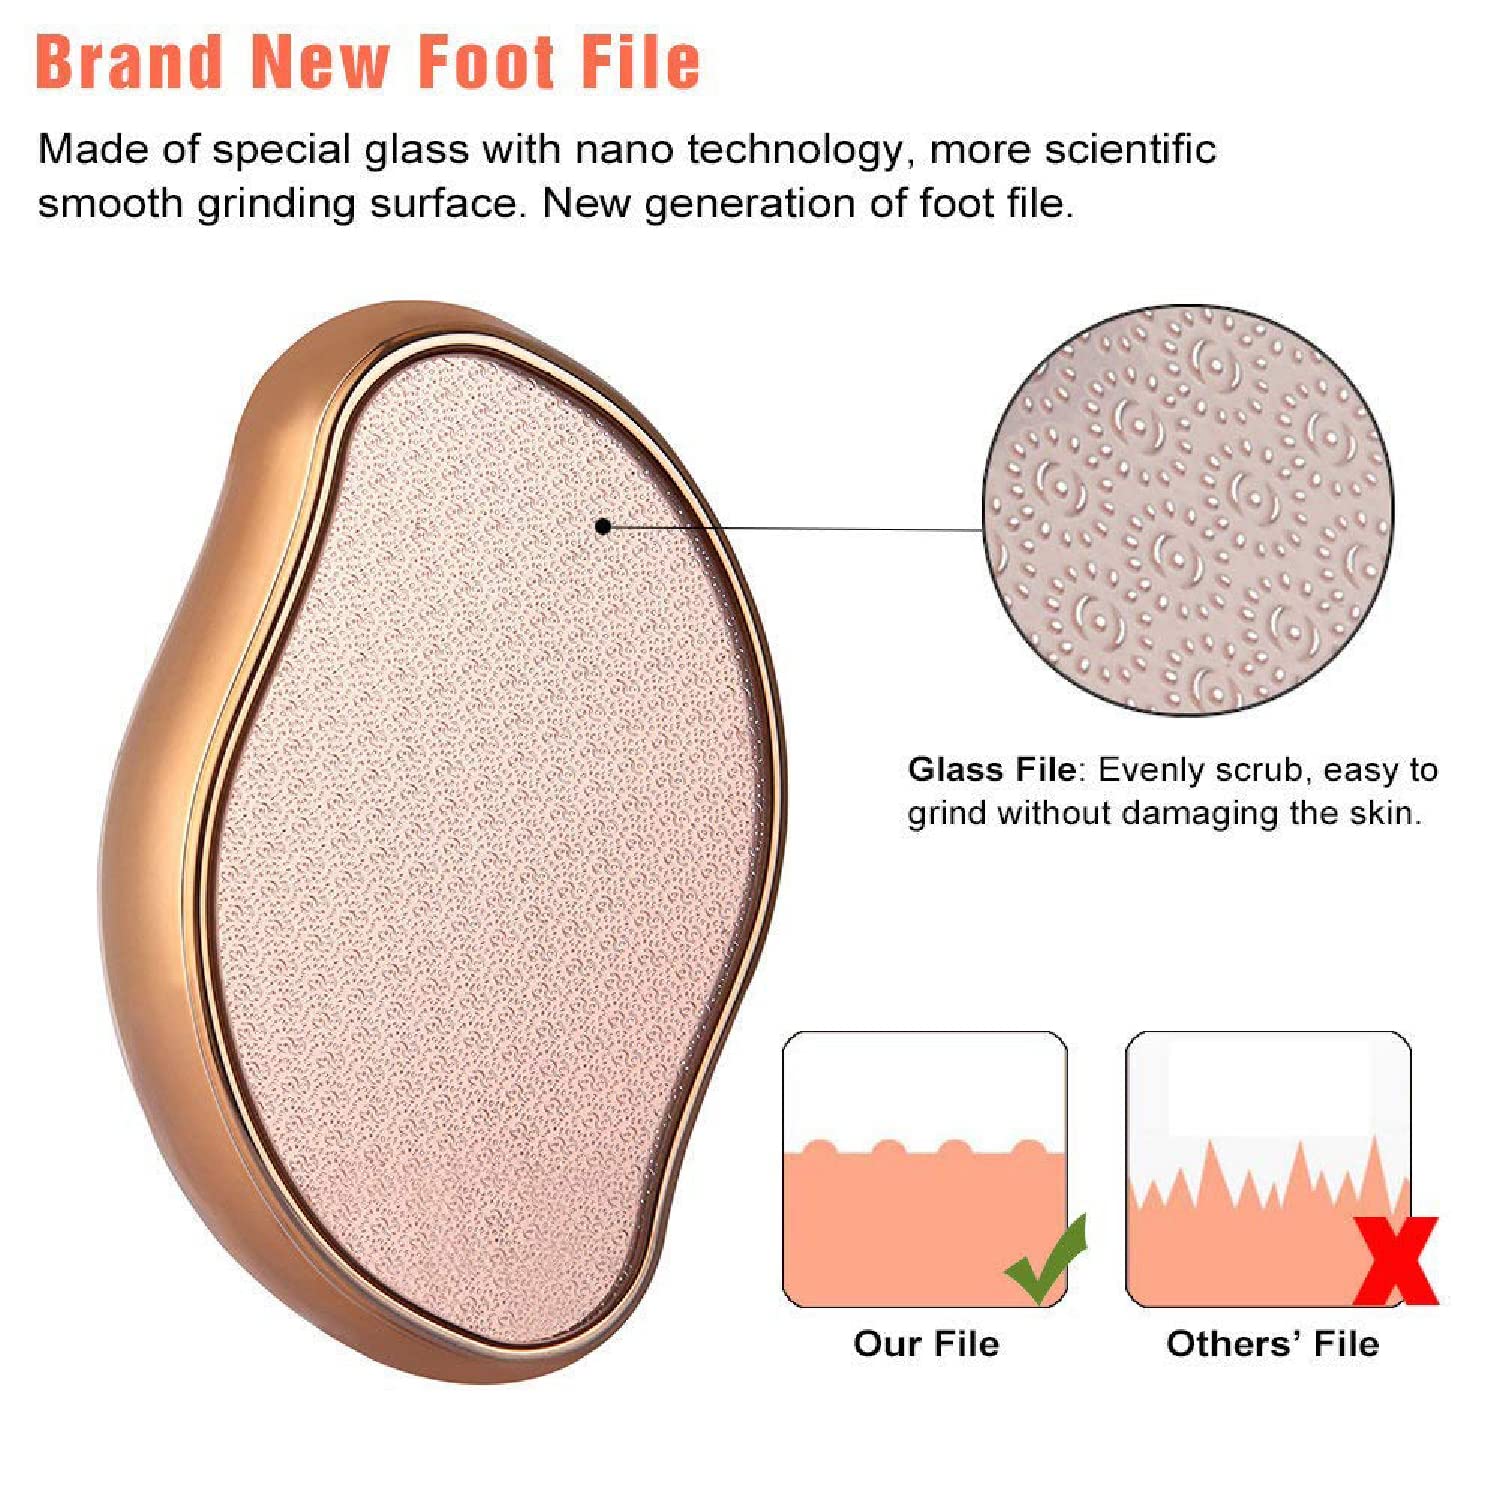 Dr Foot Glass File Callus Remover | For Feet, Dead Skin, Callus Remover | NANO GLASS CRYSTAL Removes Hard Skin, Leaves Feet Smooth | Pedicure tools | Foot Scraper Rasp LATEST INNOVATION - ROSE GOLD